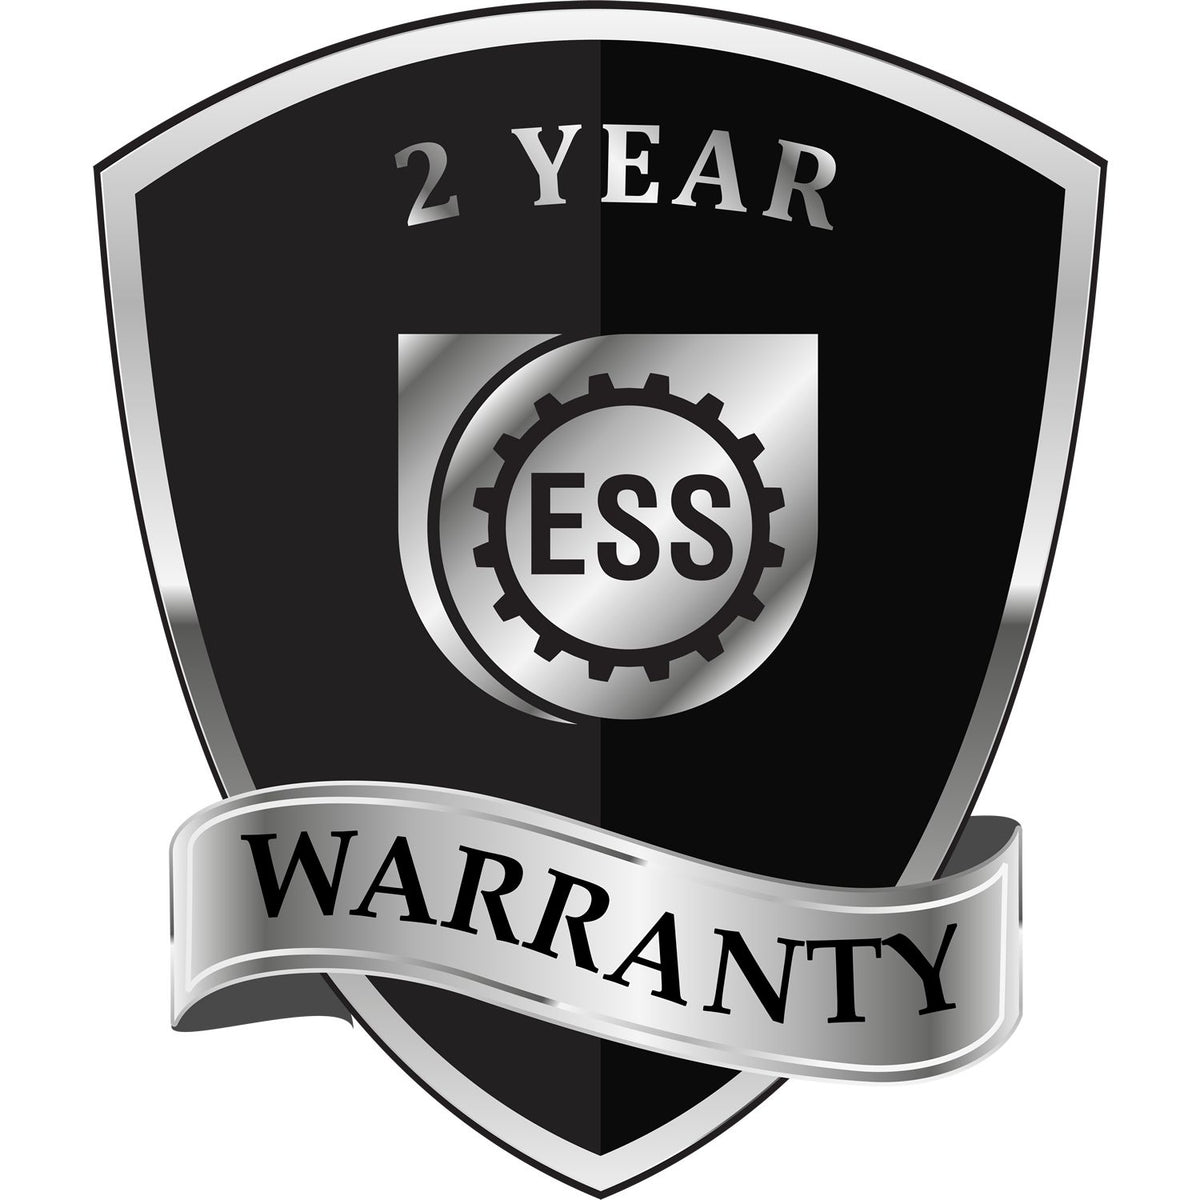 A black and silver badge or emblem showing warranty information for the Gift Ohio Land Surveyor Seal